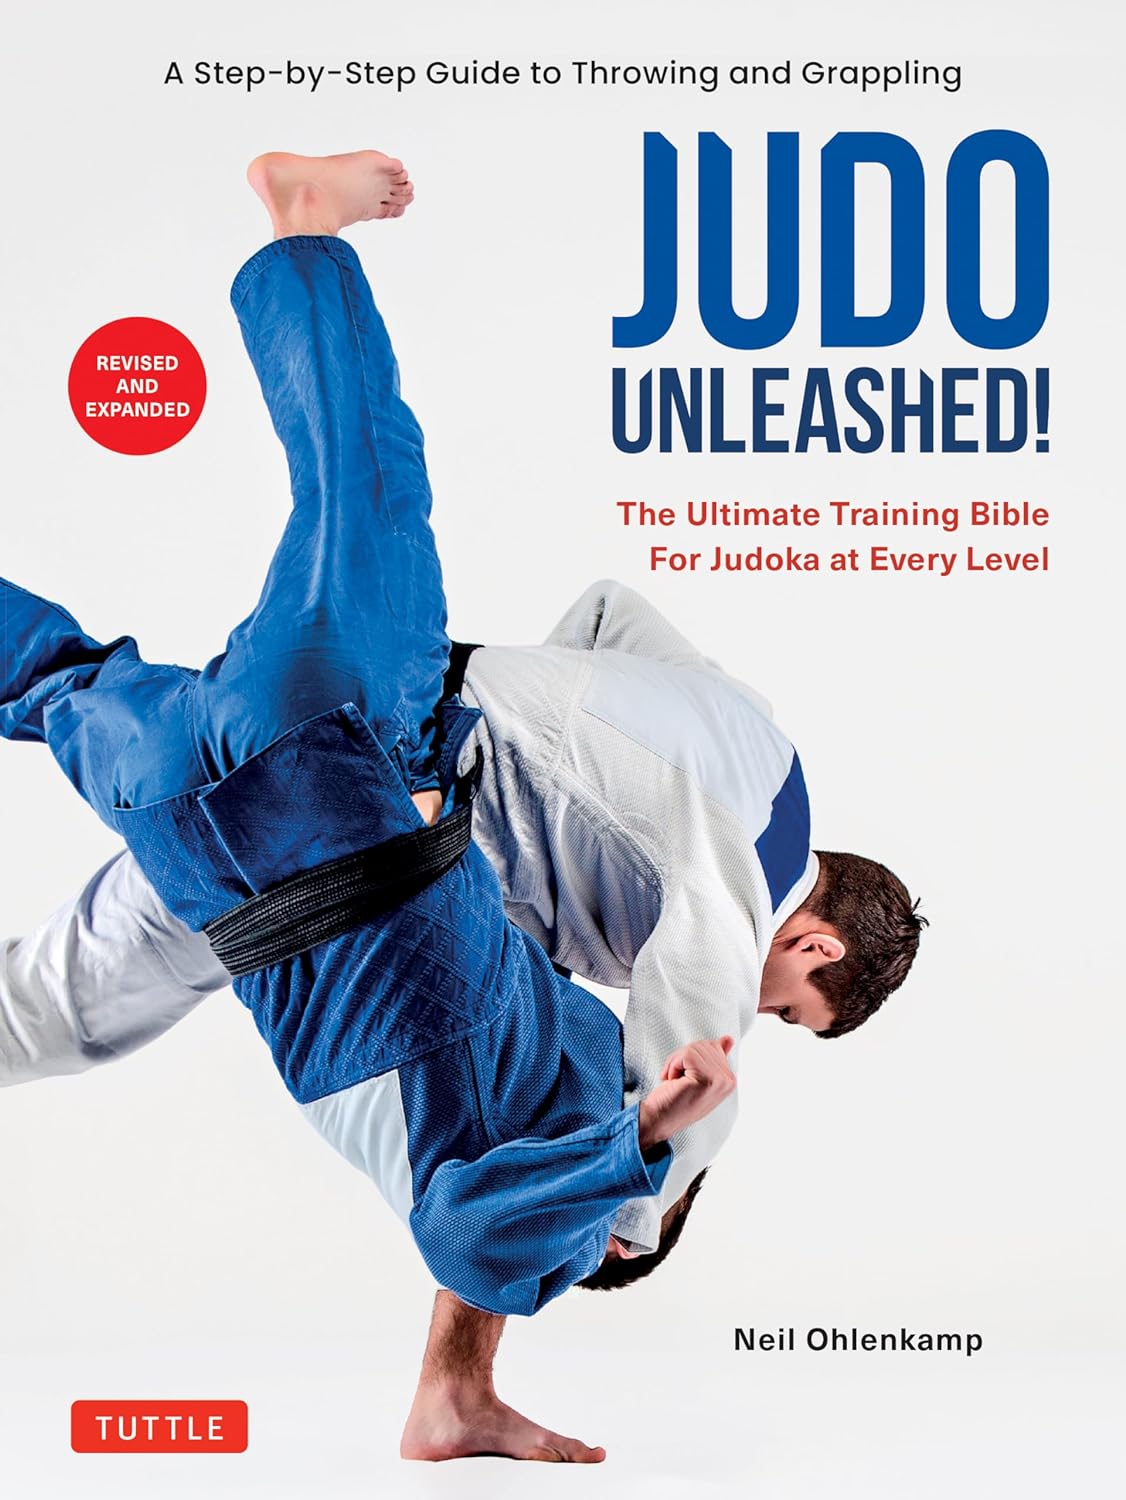 Judo Unleashed!: The Ultimate Training Bible for Judoka at Every Level Book by Neil Ohlenkamp (Revised and Expanded Edition)